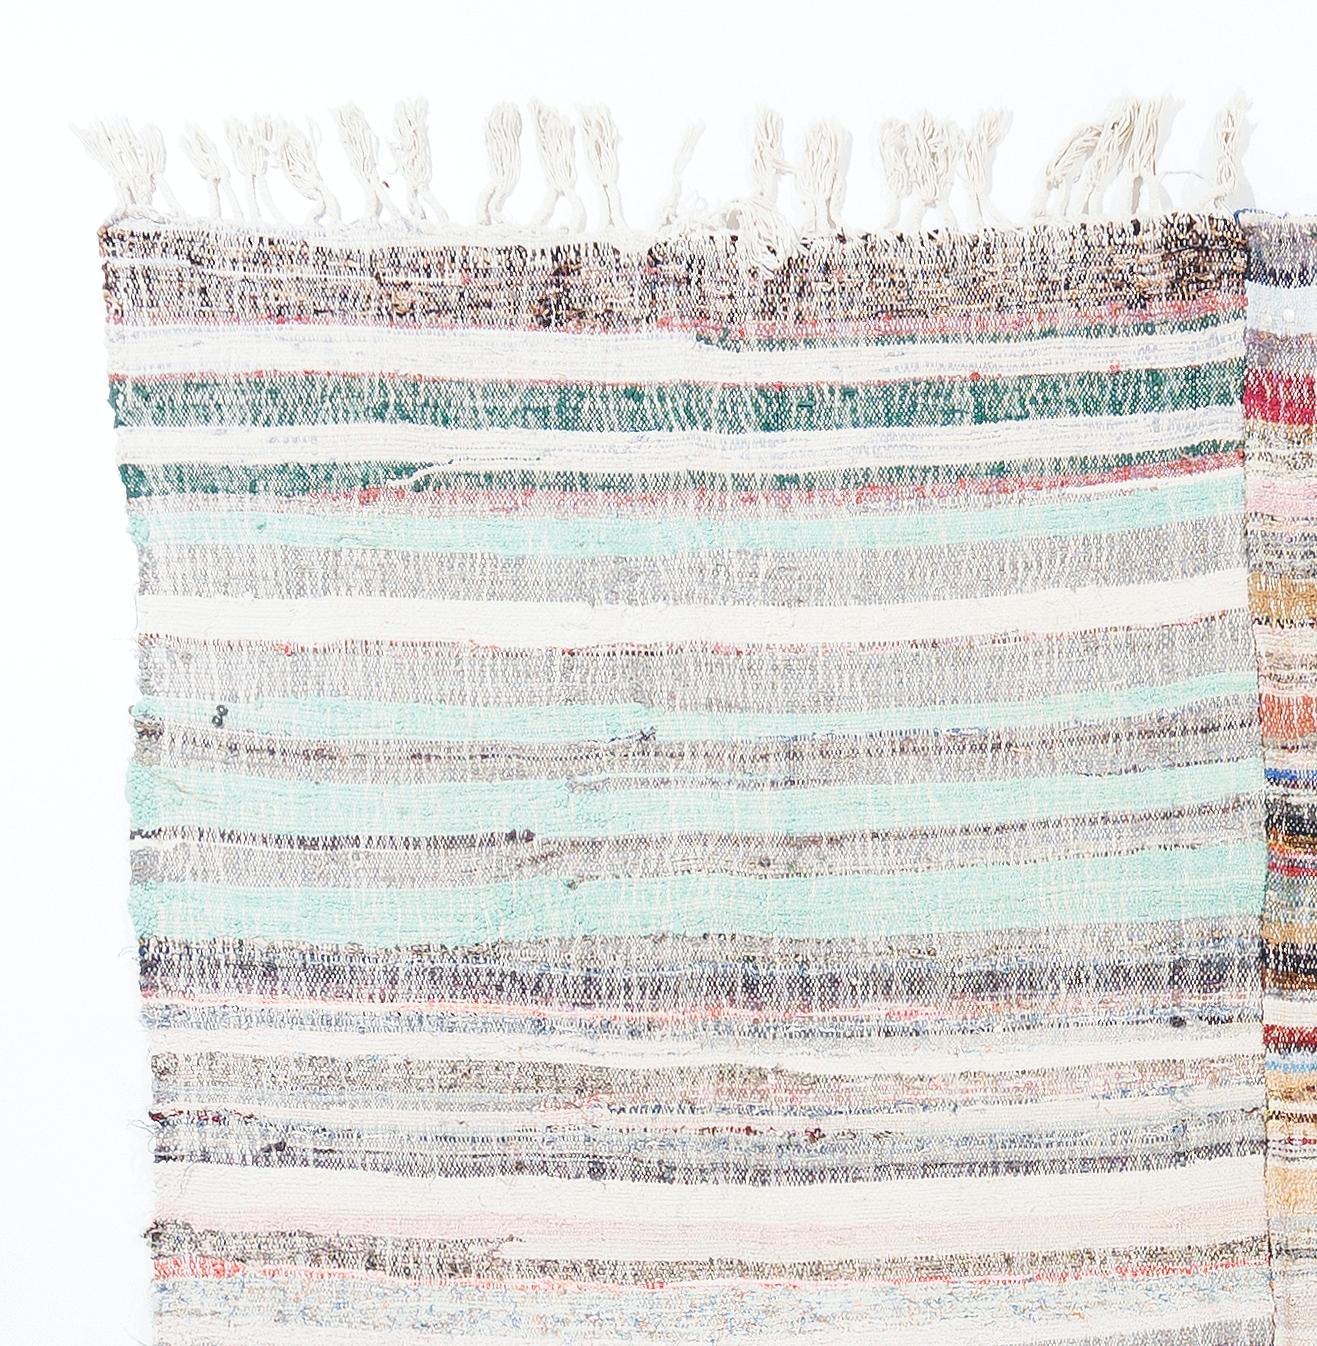 These authentic flat-weaves (Kilims) from Eastern Turkey were handwoven by nomads, to be used as floor coverings in their tents and winter homes. They were made to use for everyday life rather than re-sale and export purposes and today they are very